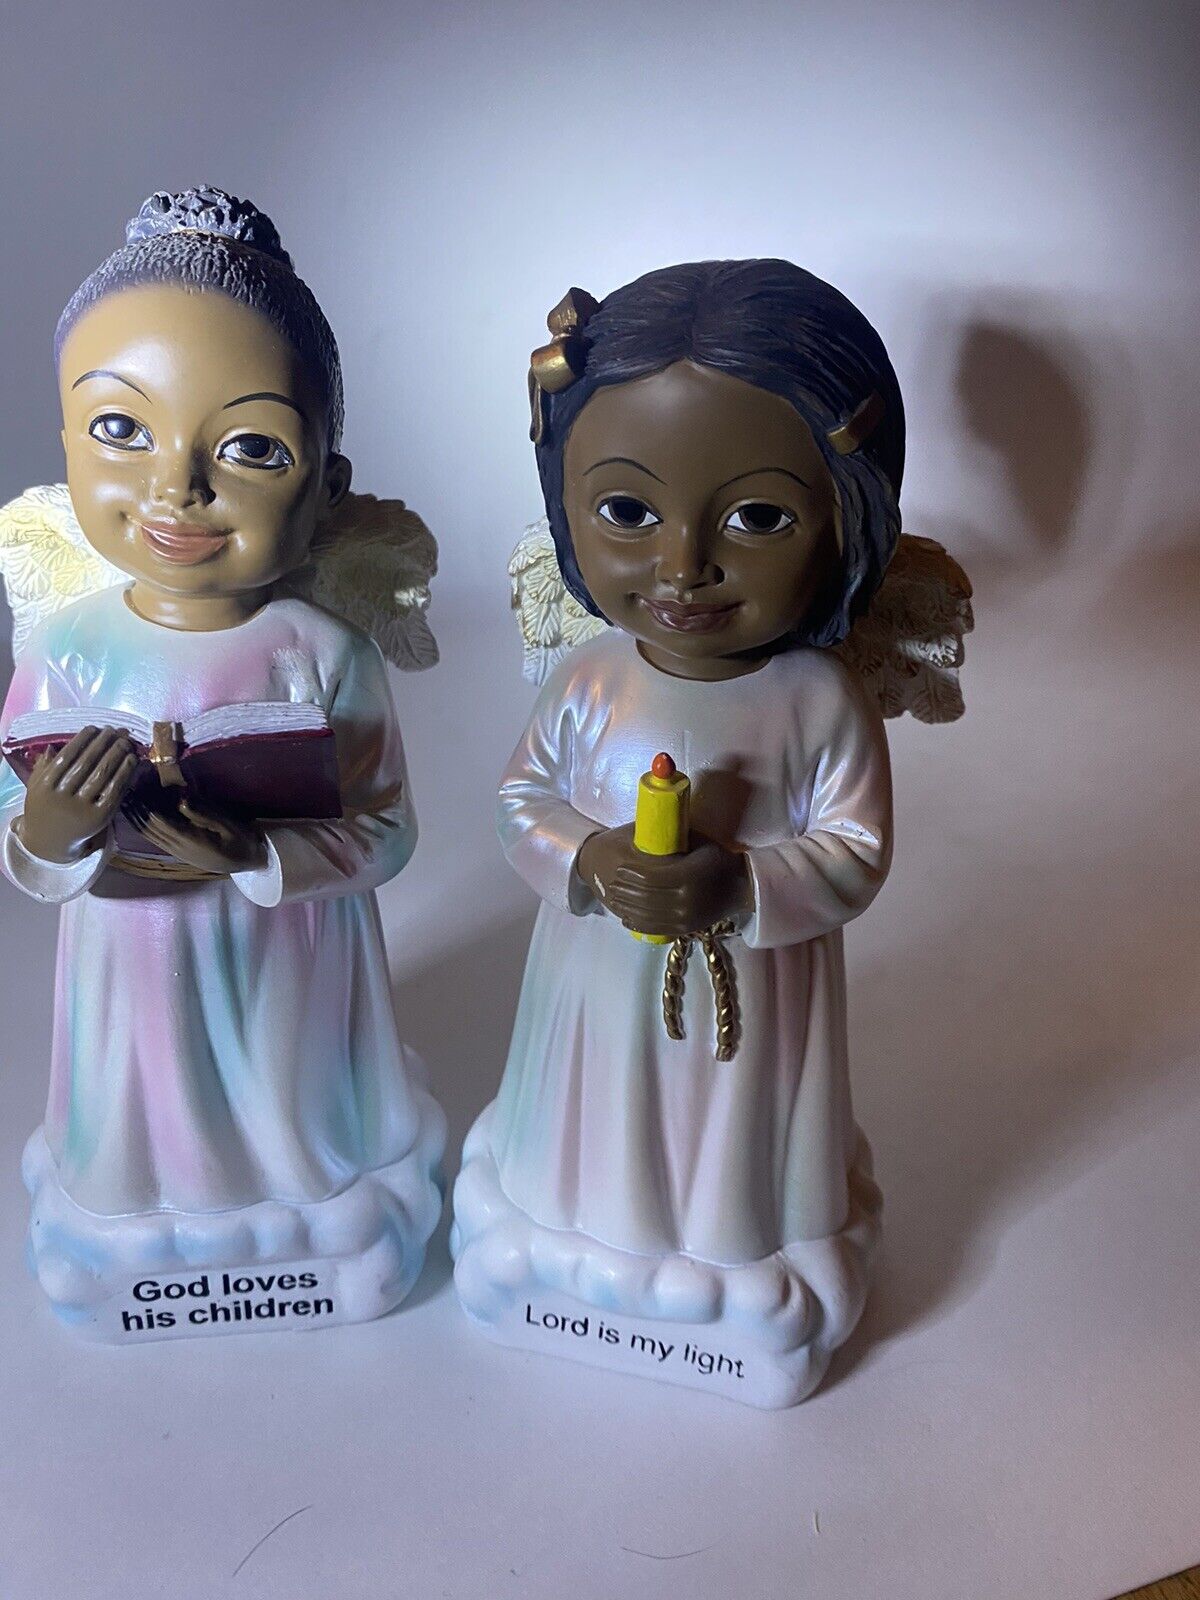 Two Young Black Girl Angels God Loves His Children, Lord Is My Light